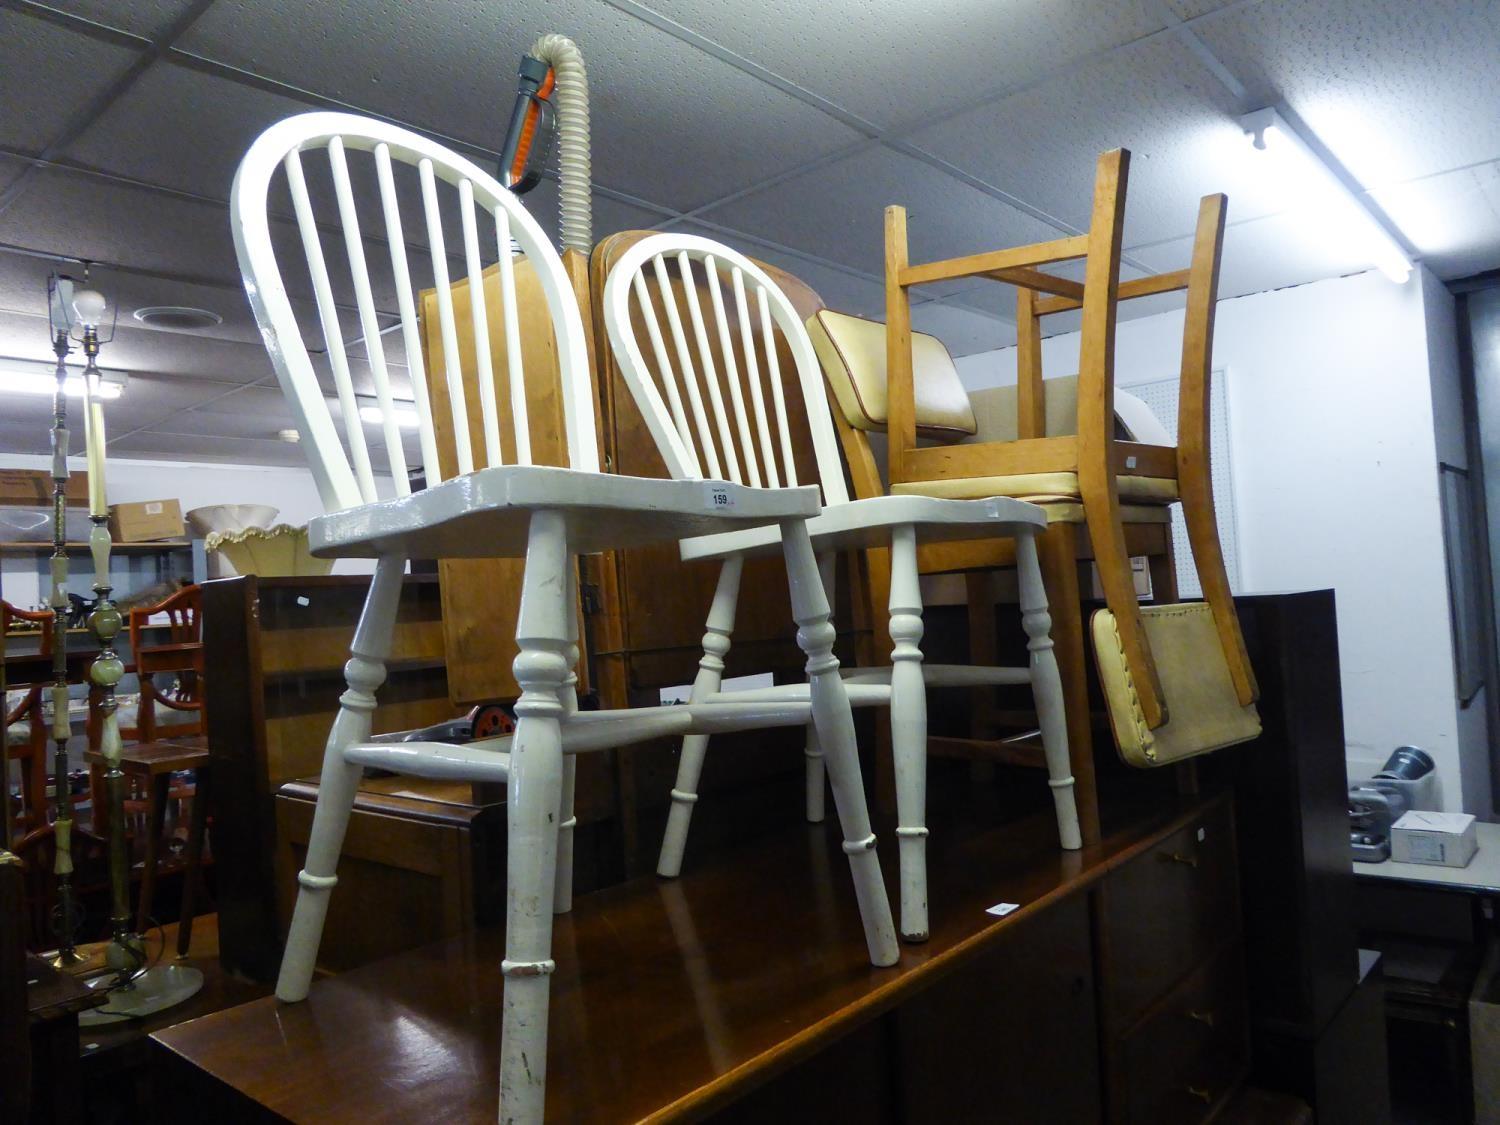 A PAIR OF WHITE PAINTED HOOP BACK CHAIRS, AND A PAIR OF 1960's CHAIRS (4)